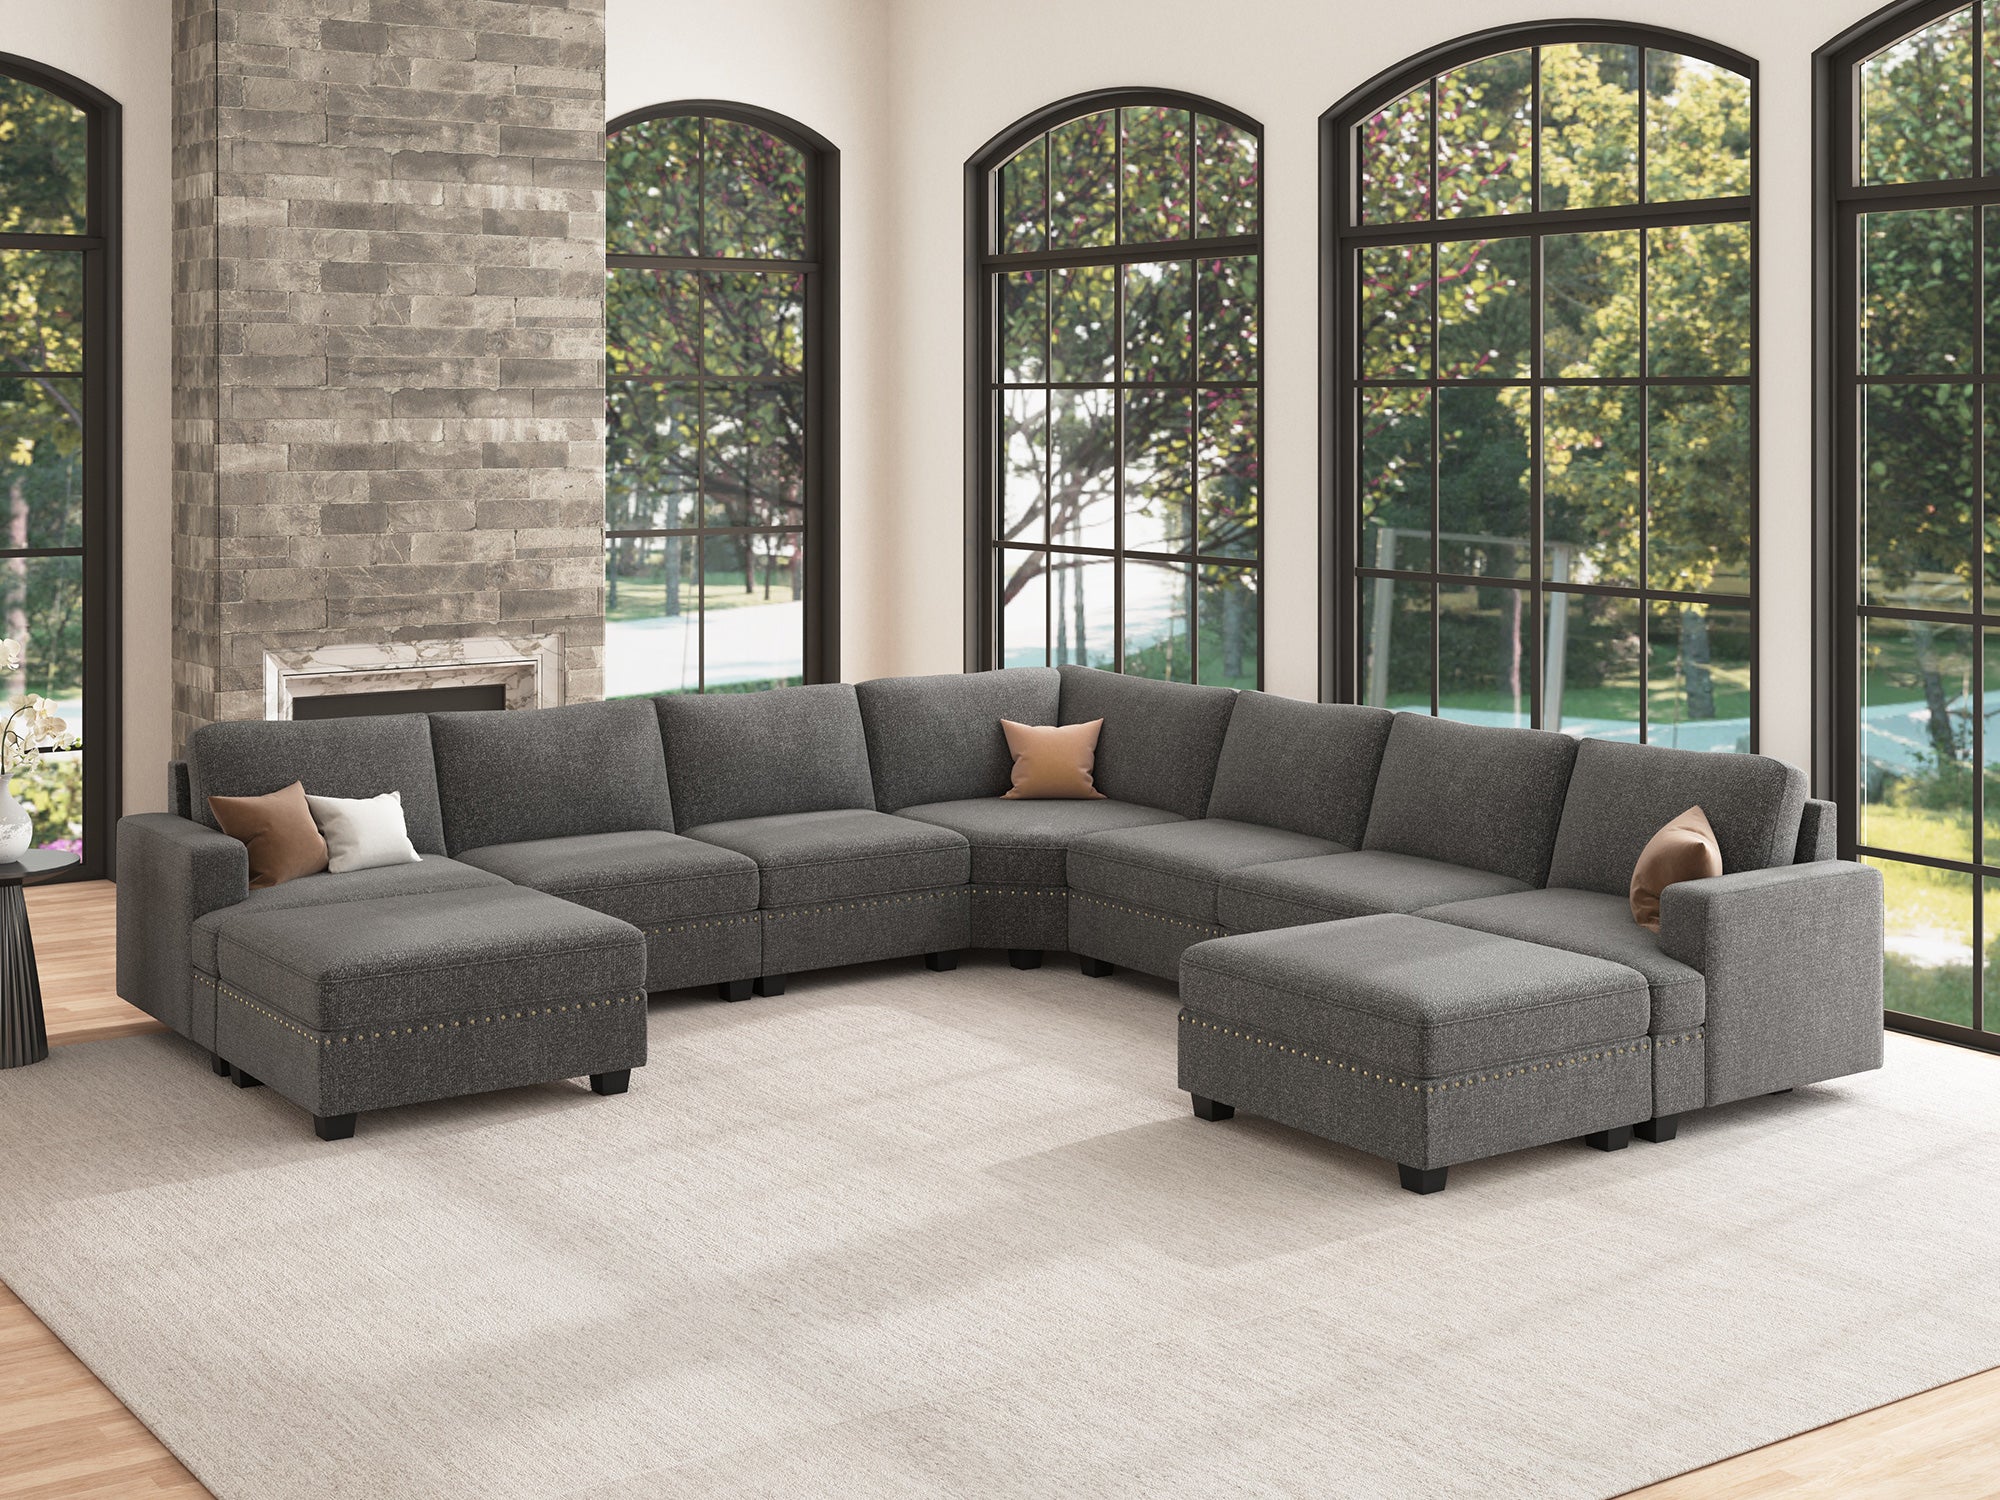 NOLANY 7-Seat Corner Modular Sofa Oversized Sectional Sofa Couch with Two Storage Reversible Ottoman #Color_Light Grey